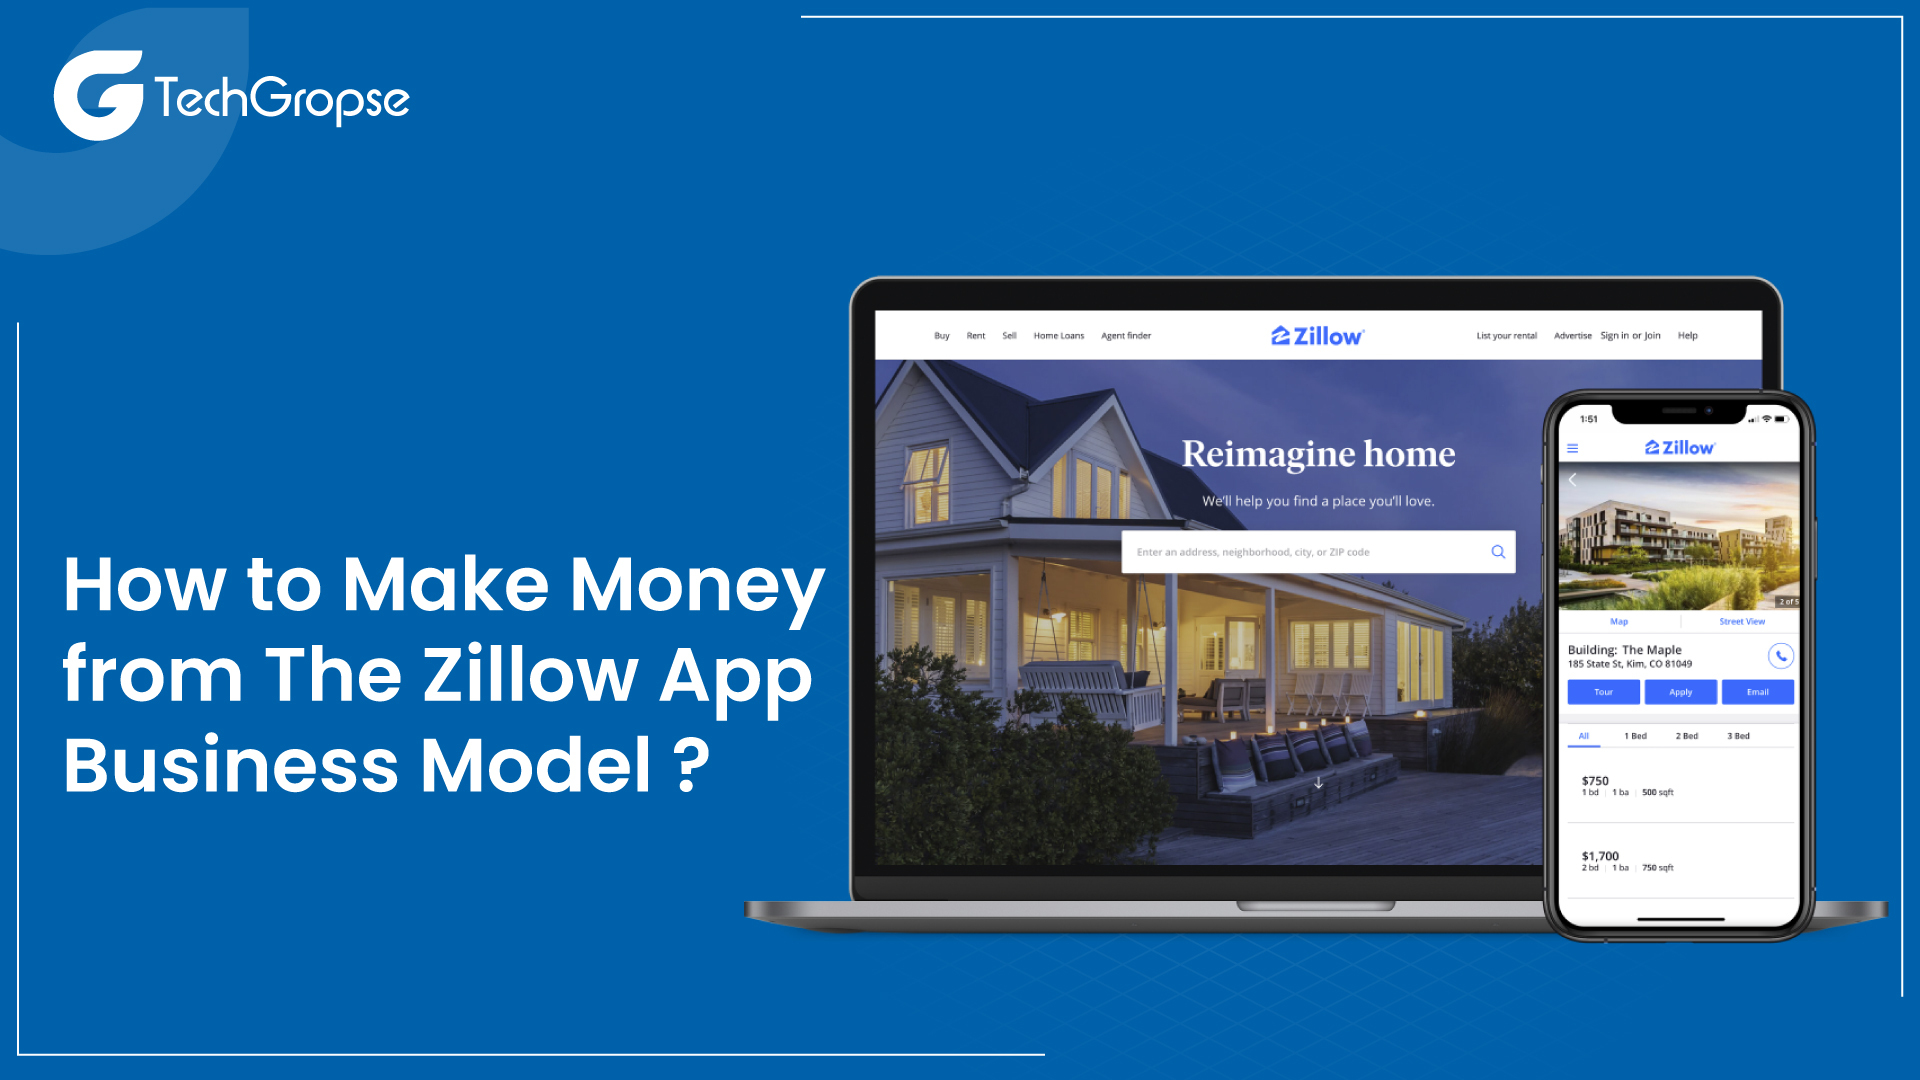 How to Make Money from the Zillow App Business Model